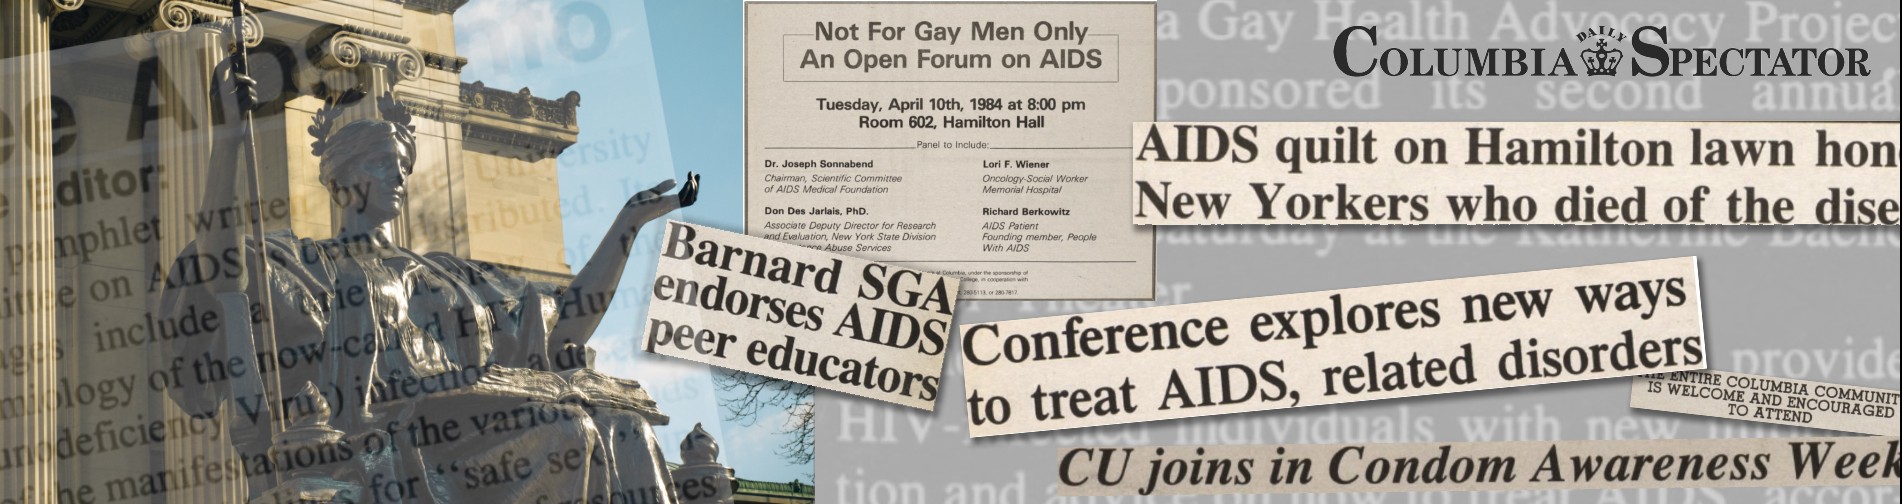 Collage of news articles about HIV and AIDS published by Columbia Spectator.